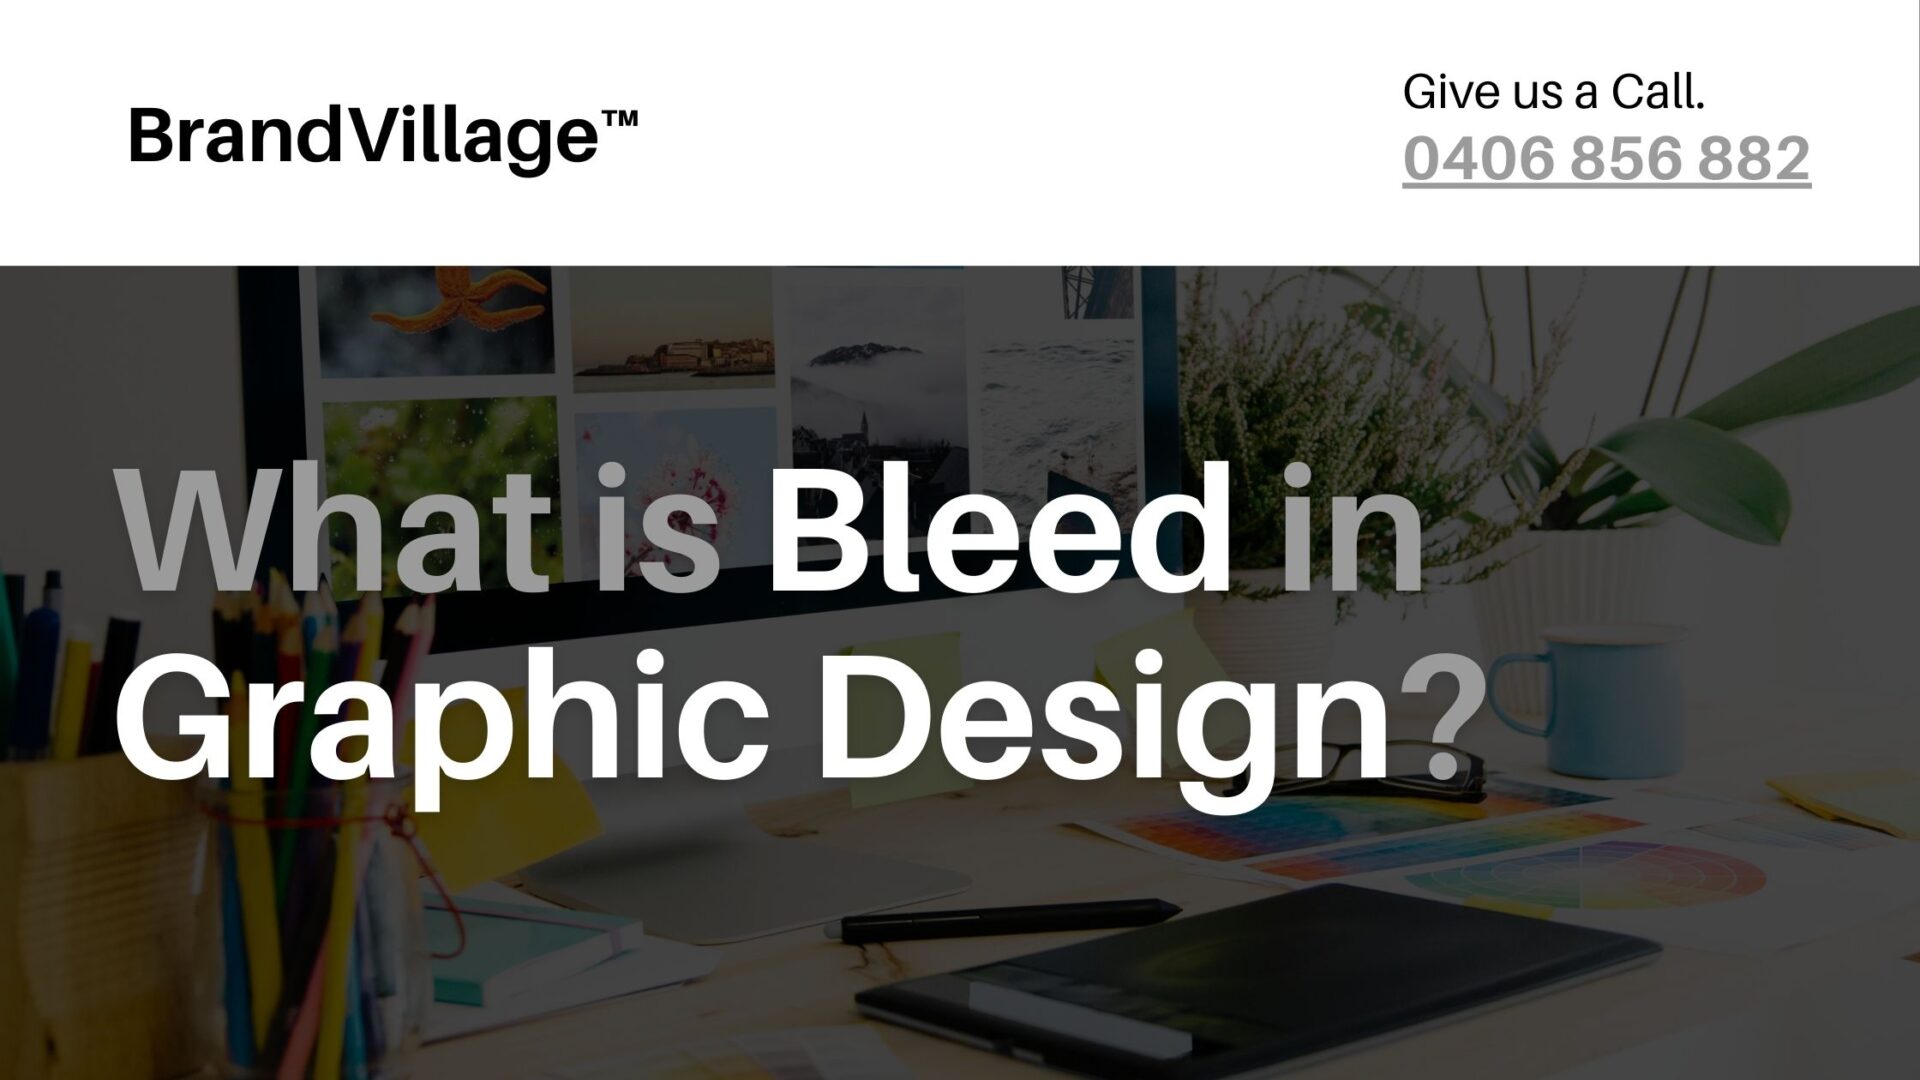 What is Bleed in Graphic Design?